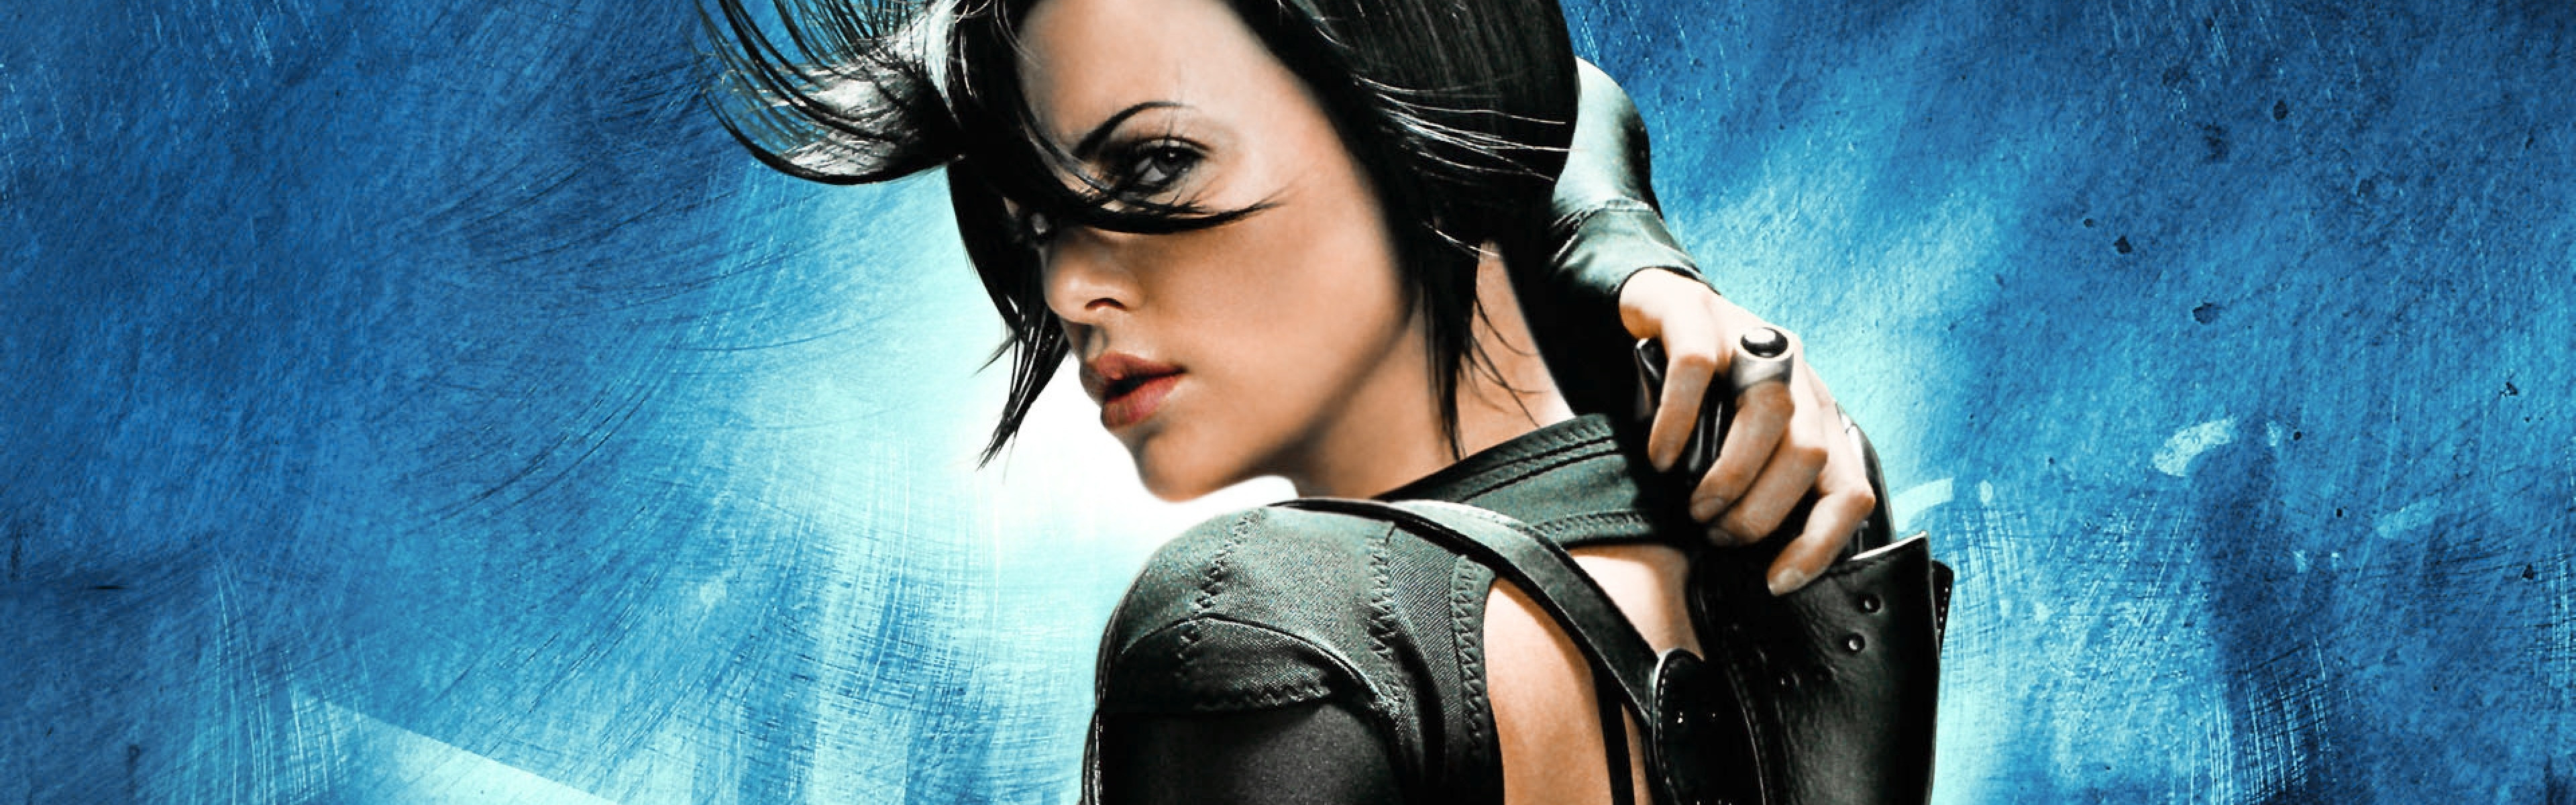 3840x1200  Wallpaper aeon flux, Ã¦on flux, charlize theron, girl, actress